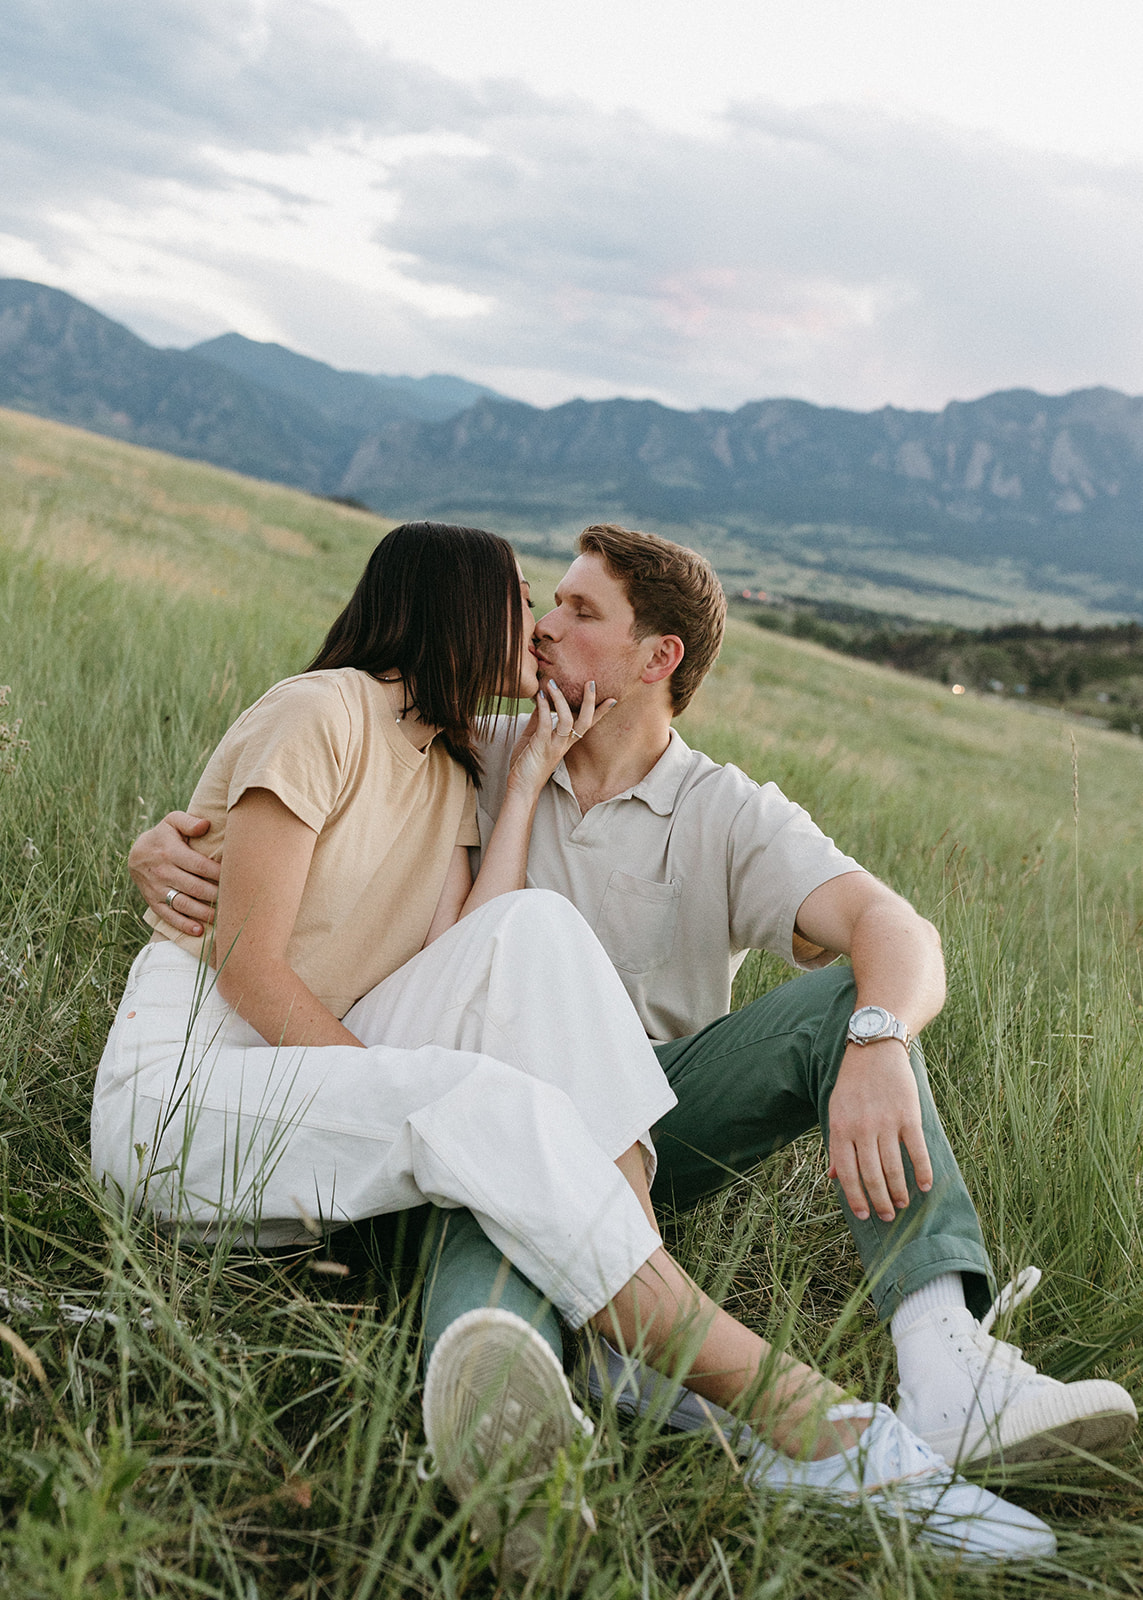 An engaged couple in neutral attire kisses among colorful wildflowers, with Boulder's Flatirons in the background